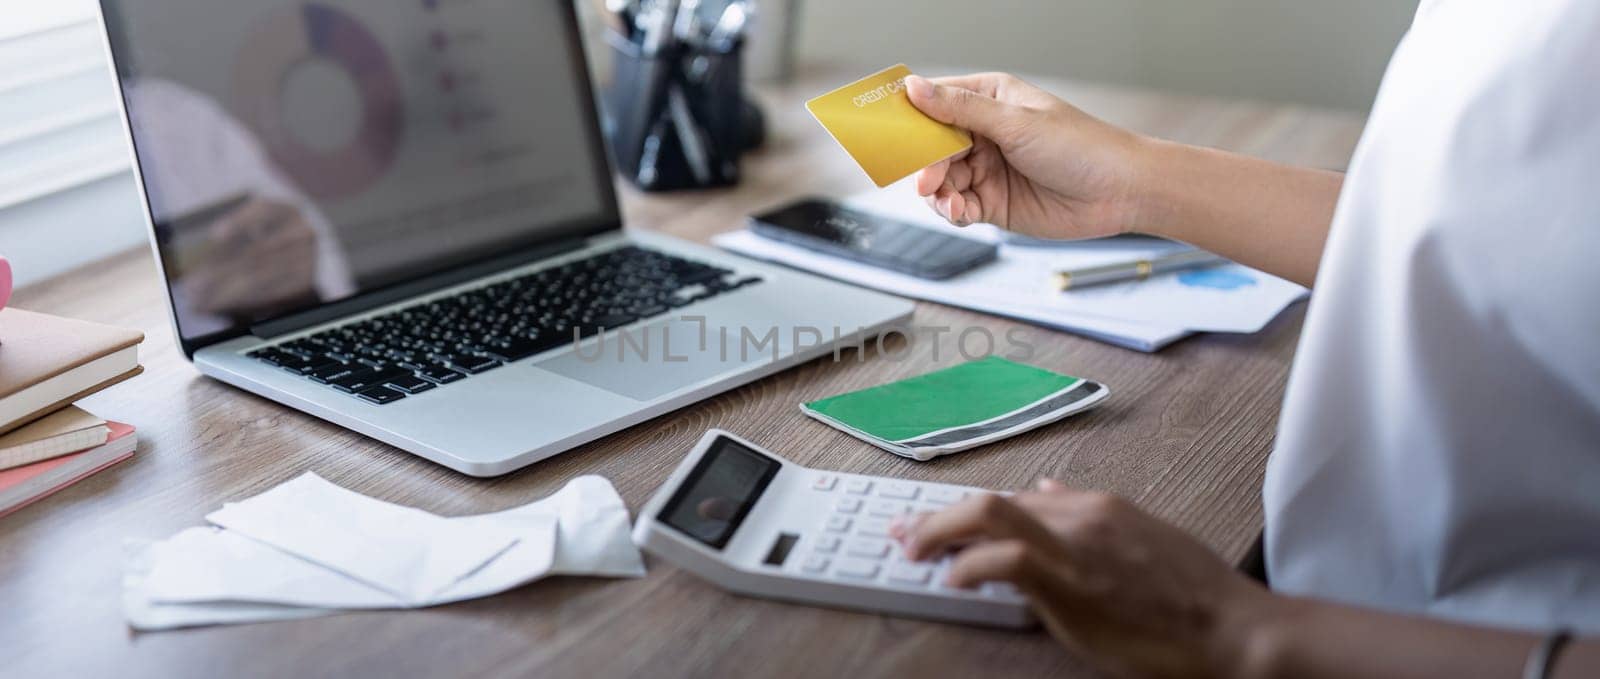 Woman holding credit card payment internet banking or shopping concept. calculating tax or payment. laptop, credit card, calculator on desk.